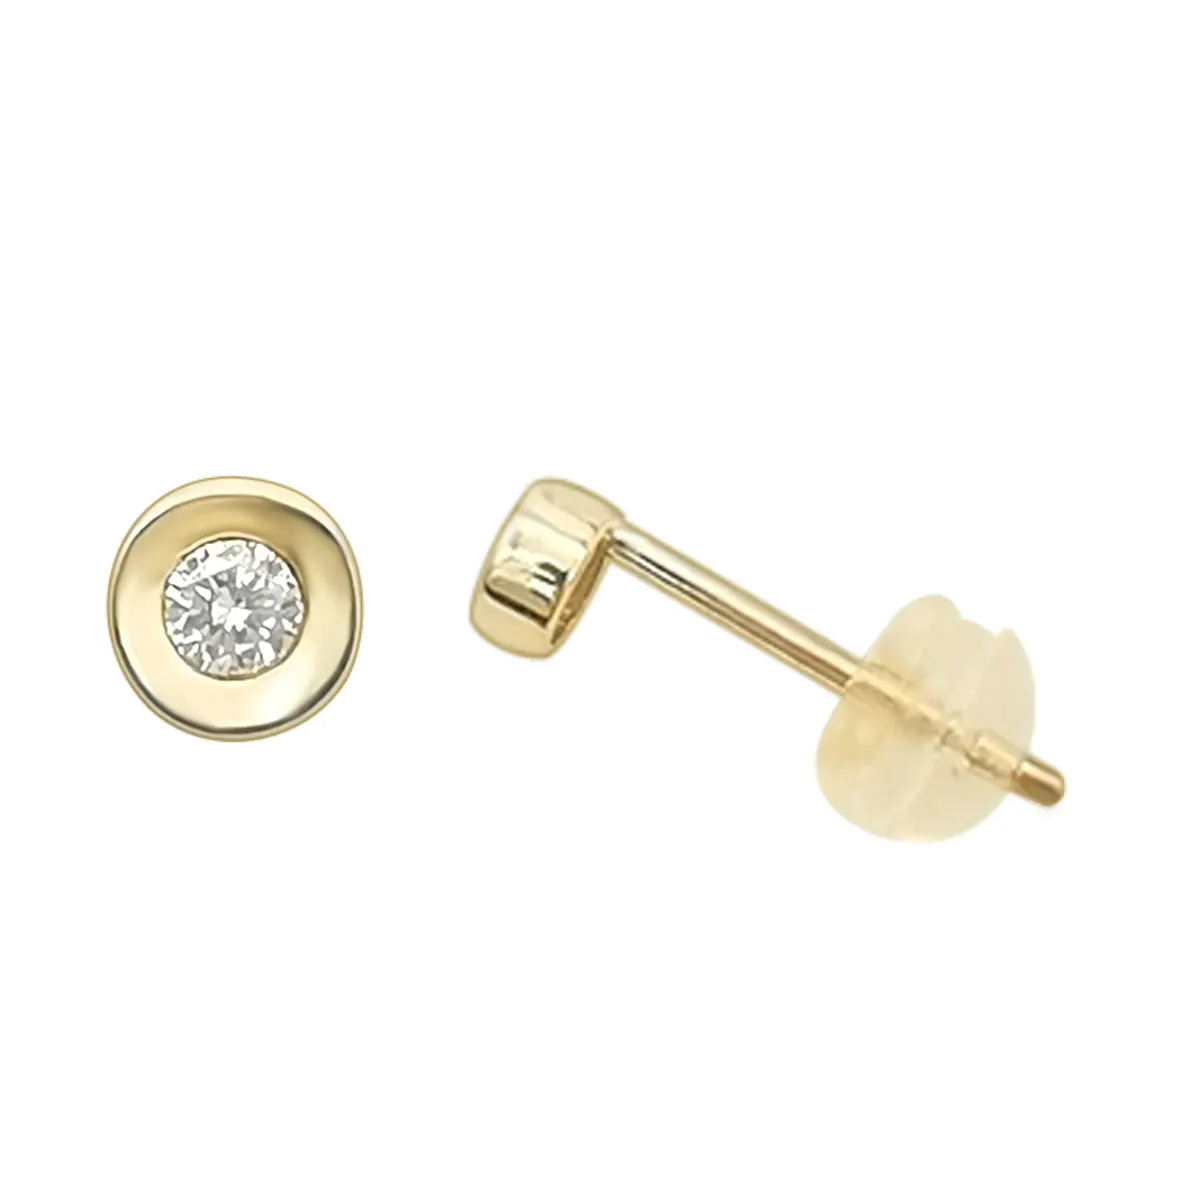 Small Cutely 9K Real gold Stud Earring with Natural Diamond Bezel Setting Stone for Christmas Gift